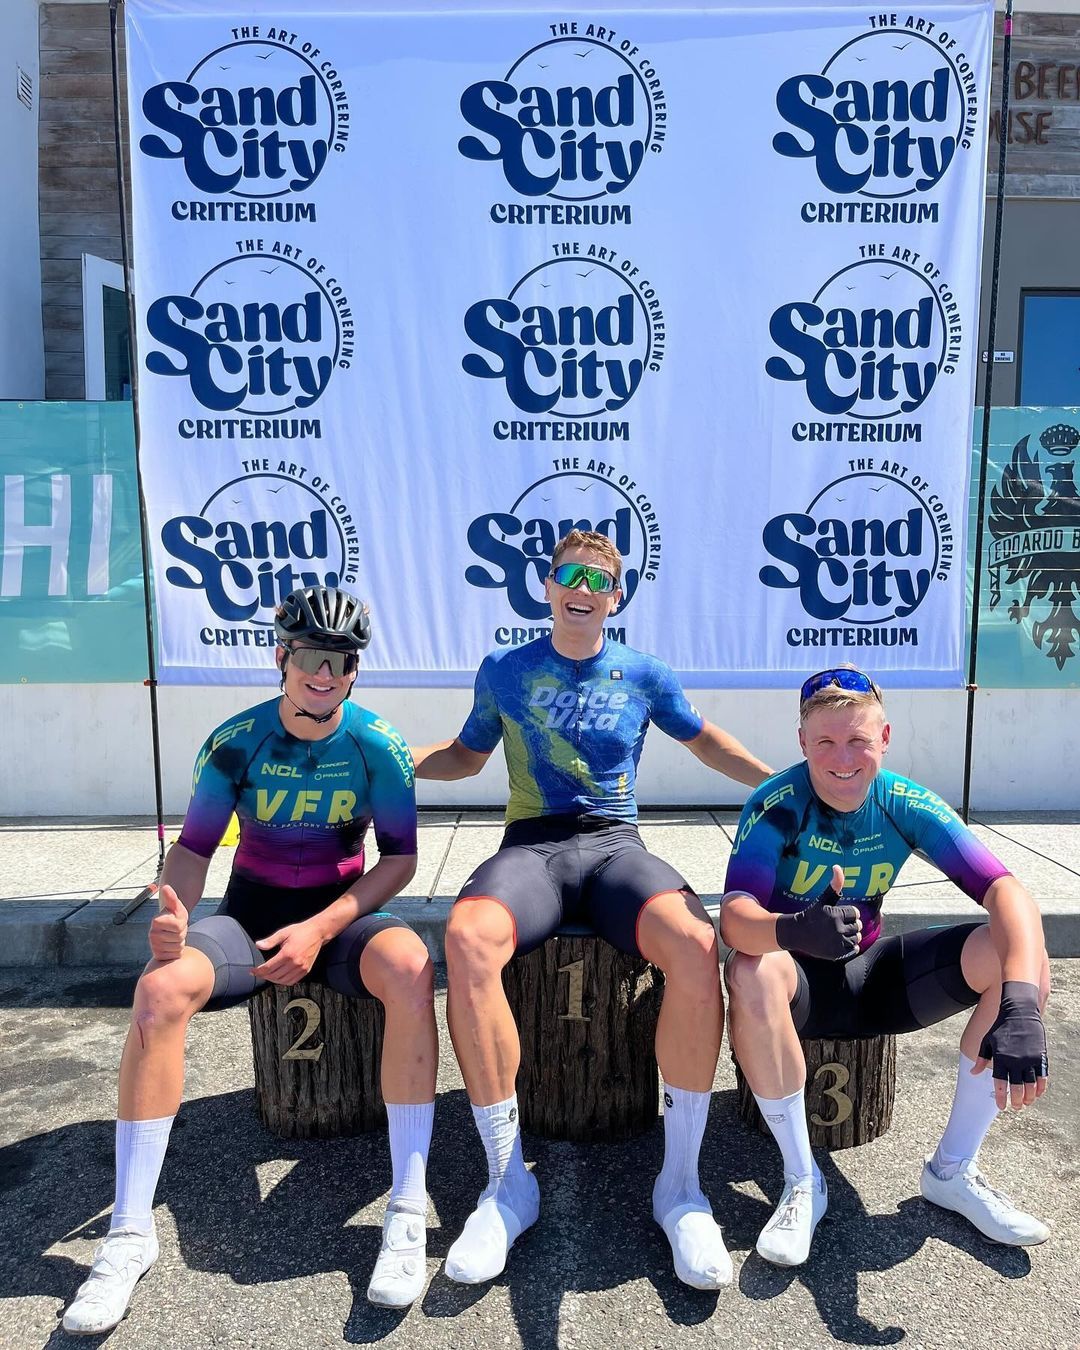 Boom! The Big Dog himself @kashman93 with 🥇 in the Cat 2/3 race at #sandcitycriterium this past weekend! Also more podium spots in the 35+ 3/4 race with @tjsnydr and @pier_diprima picking up 4th and 5th. Nice weekend boys!

@sportful @sfitalianathleticclub @equatorcoffees @poggio_labs @achieveptc @tripsforkidsmarin @sage.realestategroup @marinservicecourse @jkbrkb  #onewealthadvisors